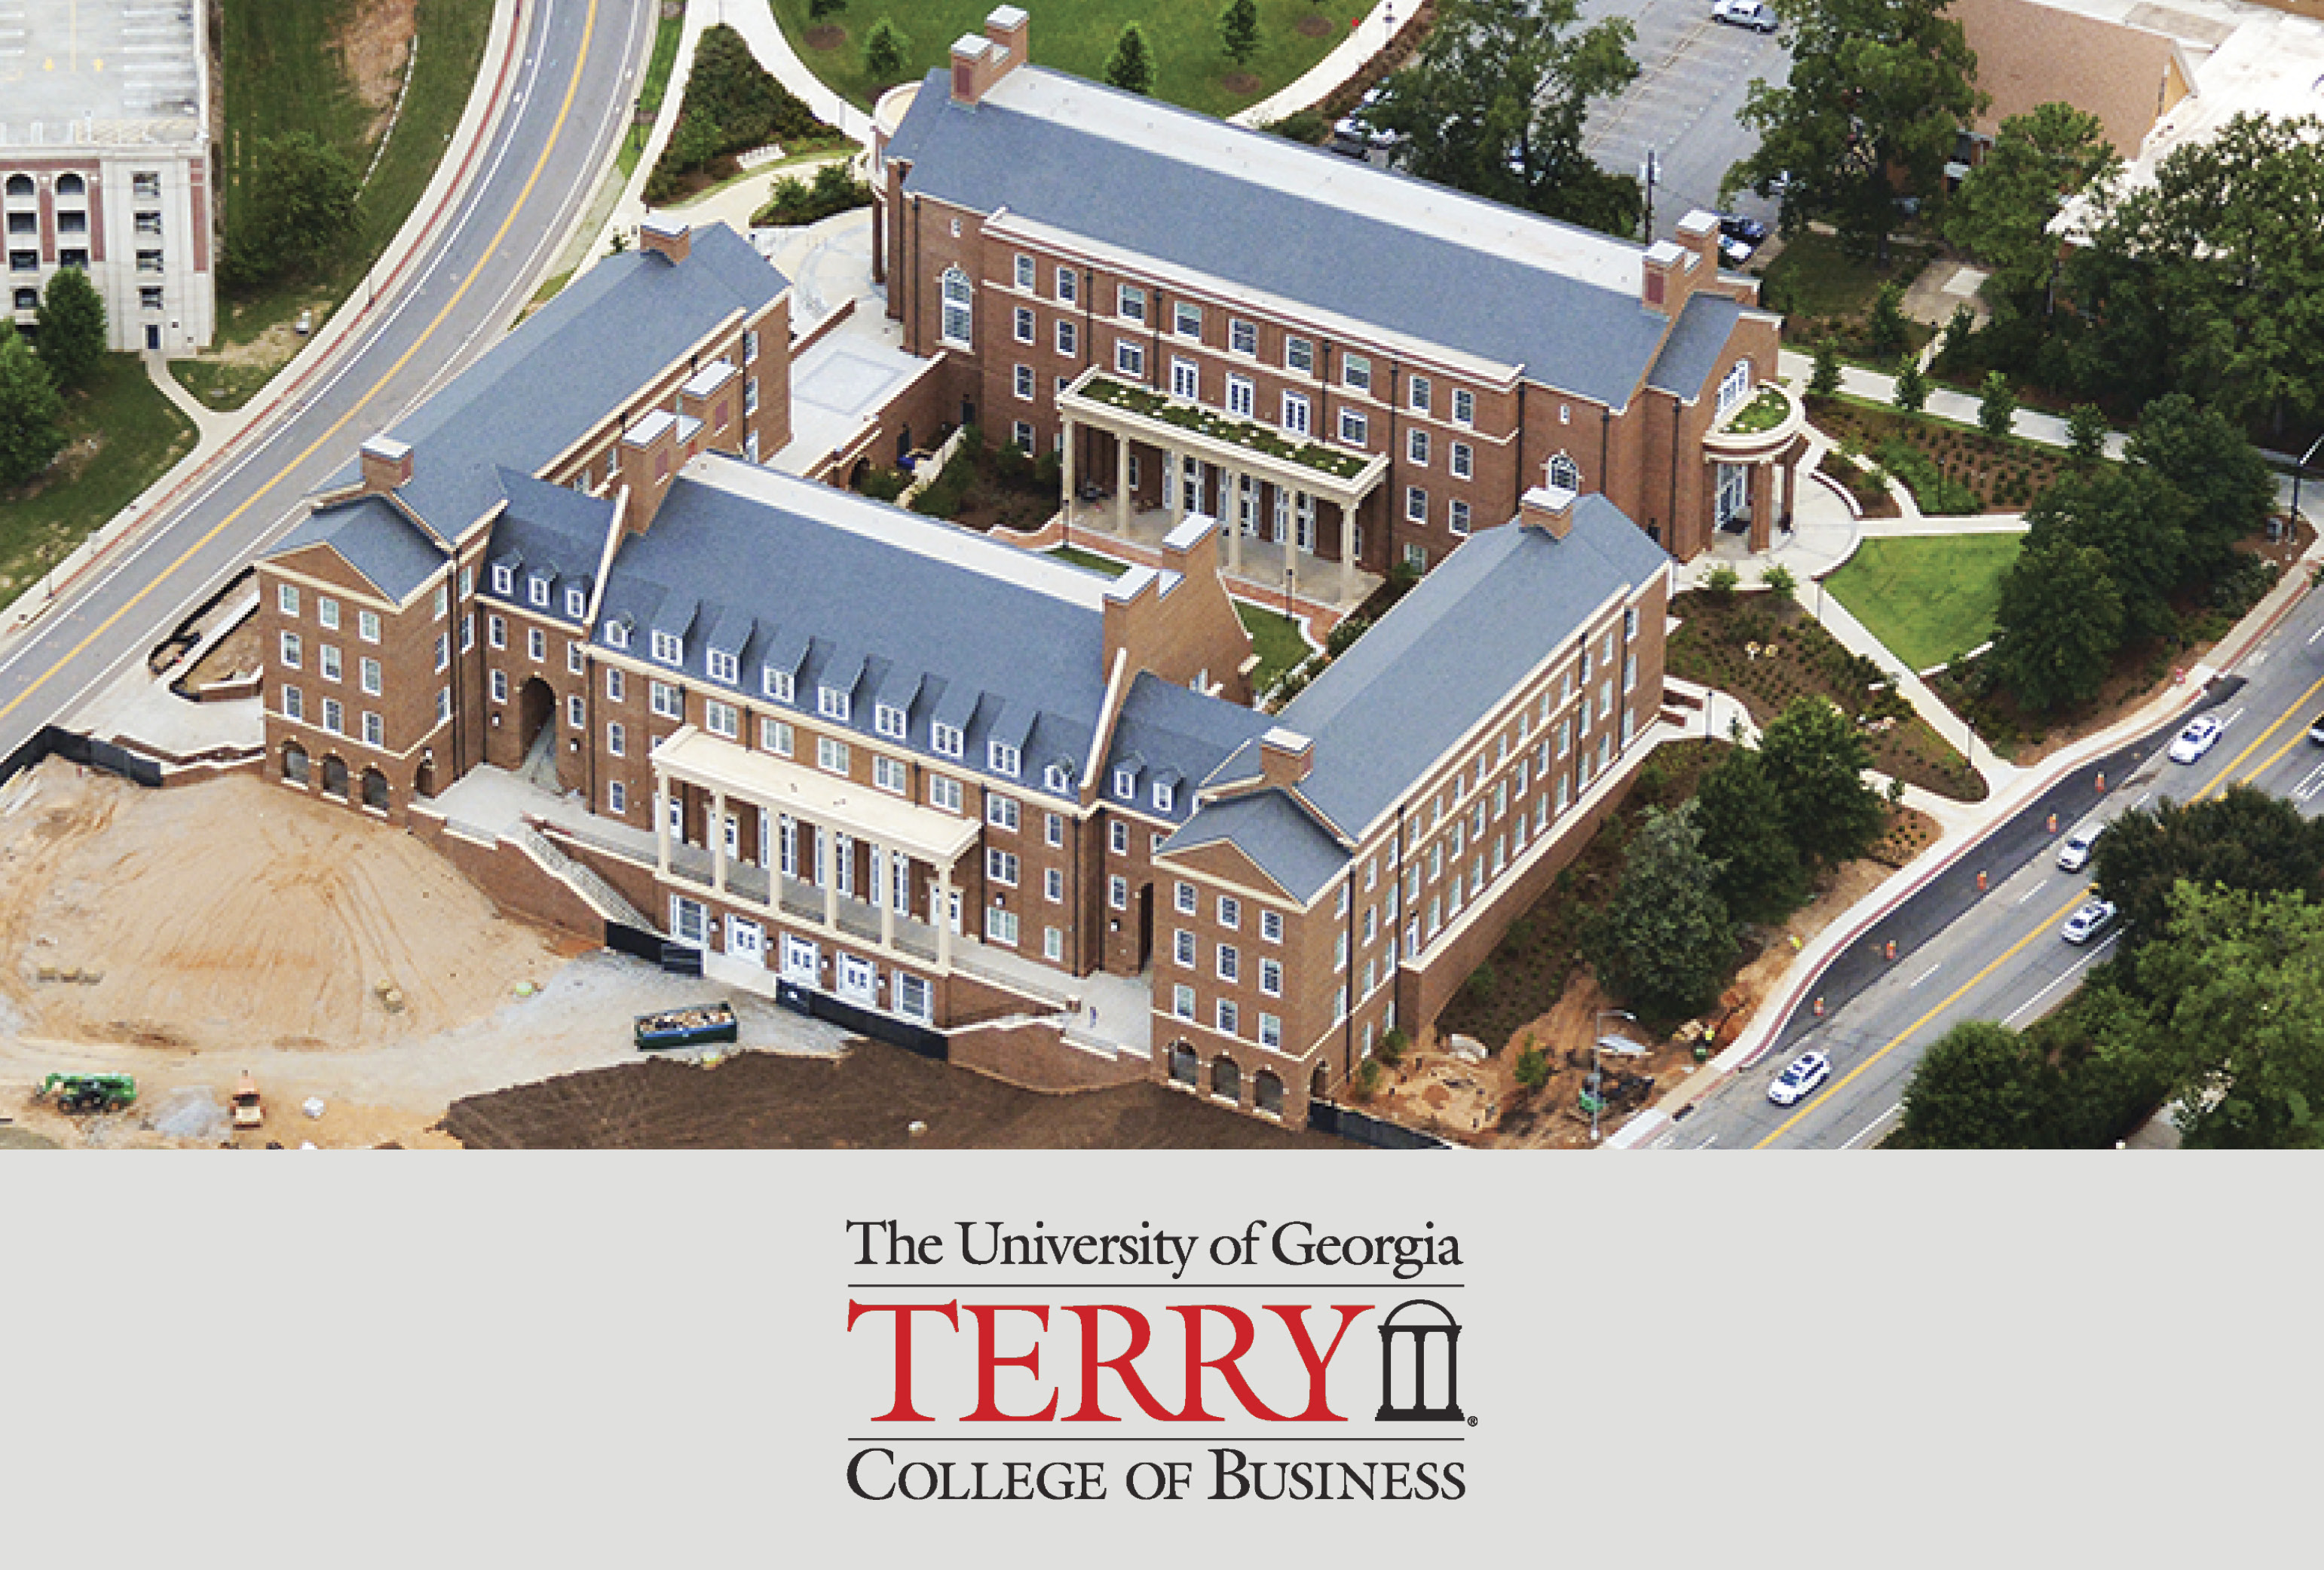  The University of Georgia Dedicates Phase II, Breaks Ground on Phase III of the Business Learning Community at the Terry College of Business